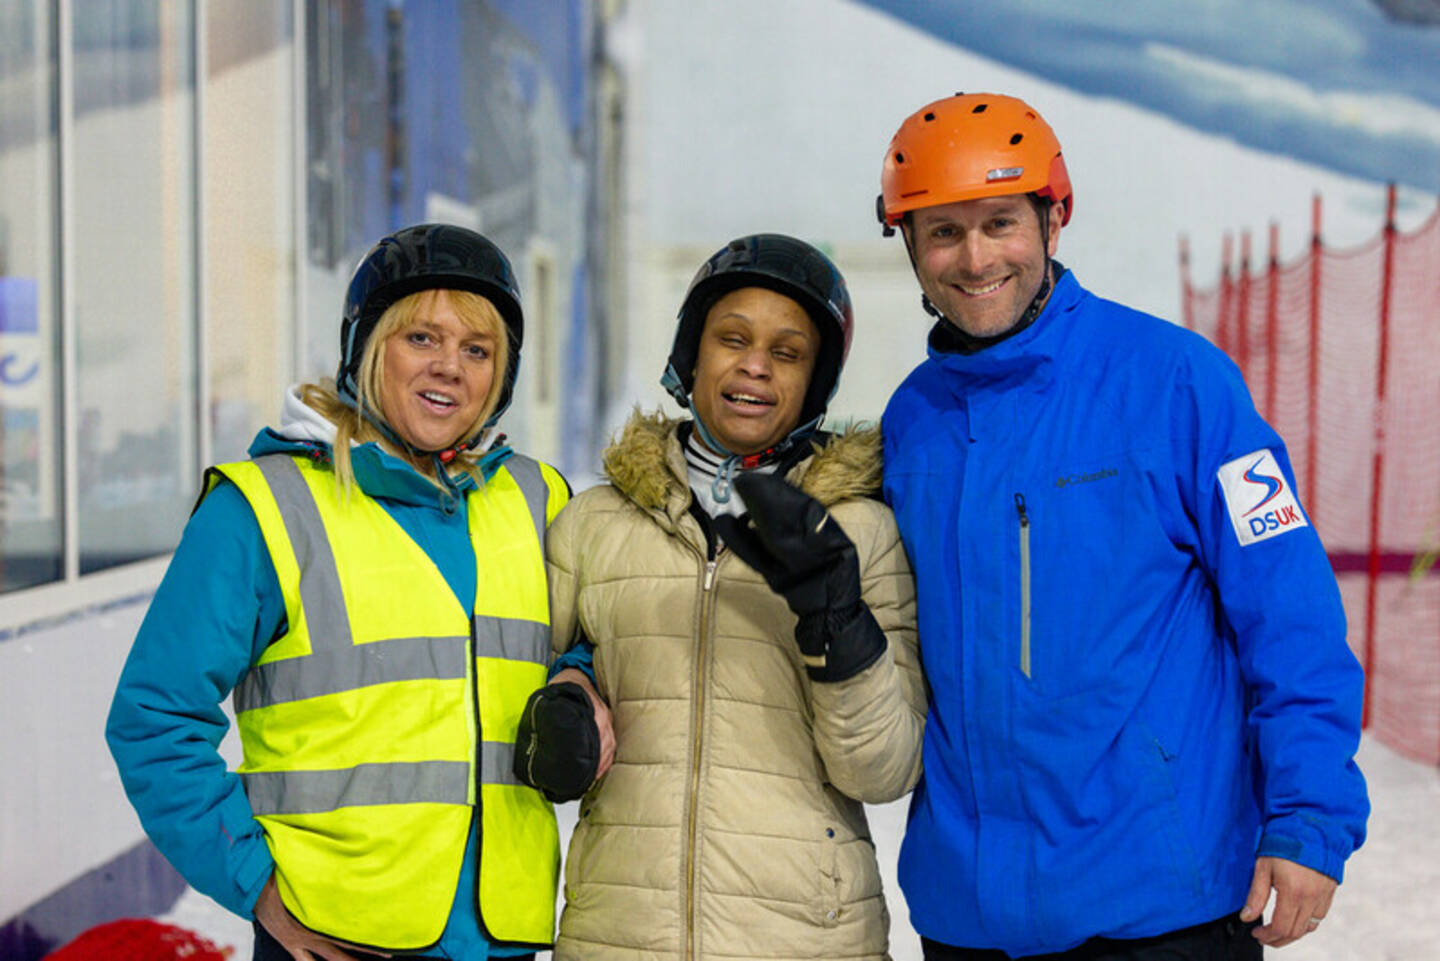 Two women, Tracey and Hazel, and a man, James, stand arm-in-arm at an indoor ski centre. They’re wearing thick coats and helmets and are smiling to camera.